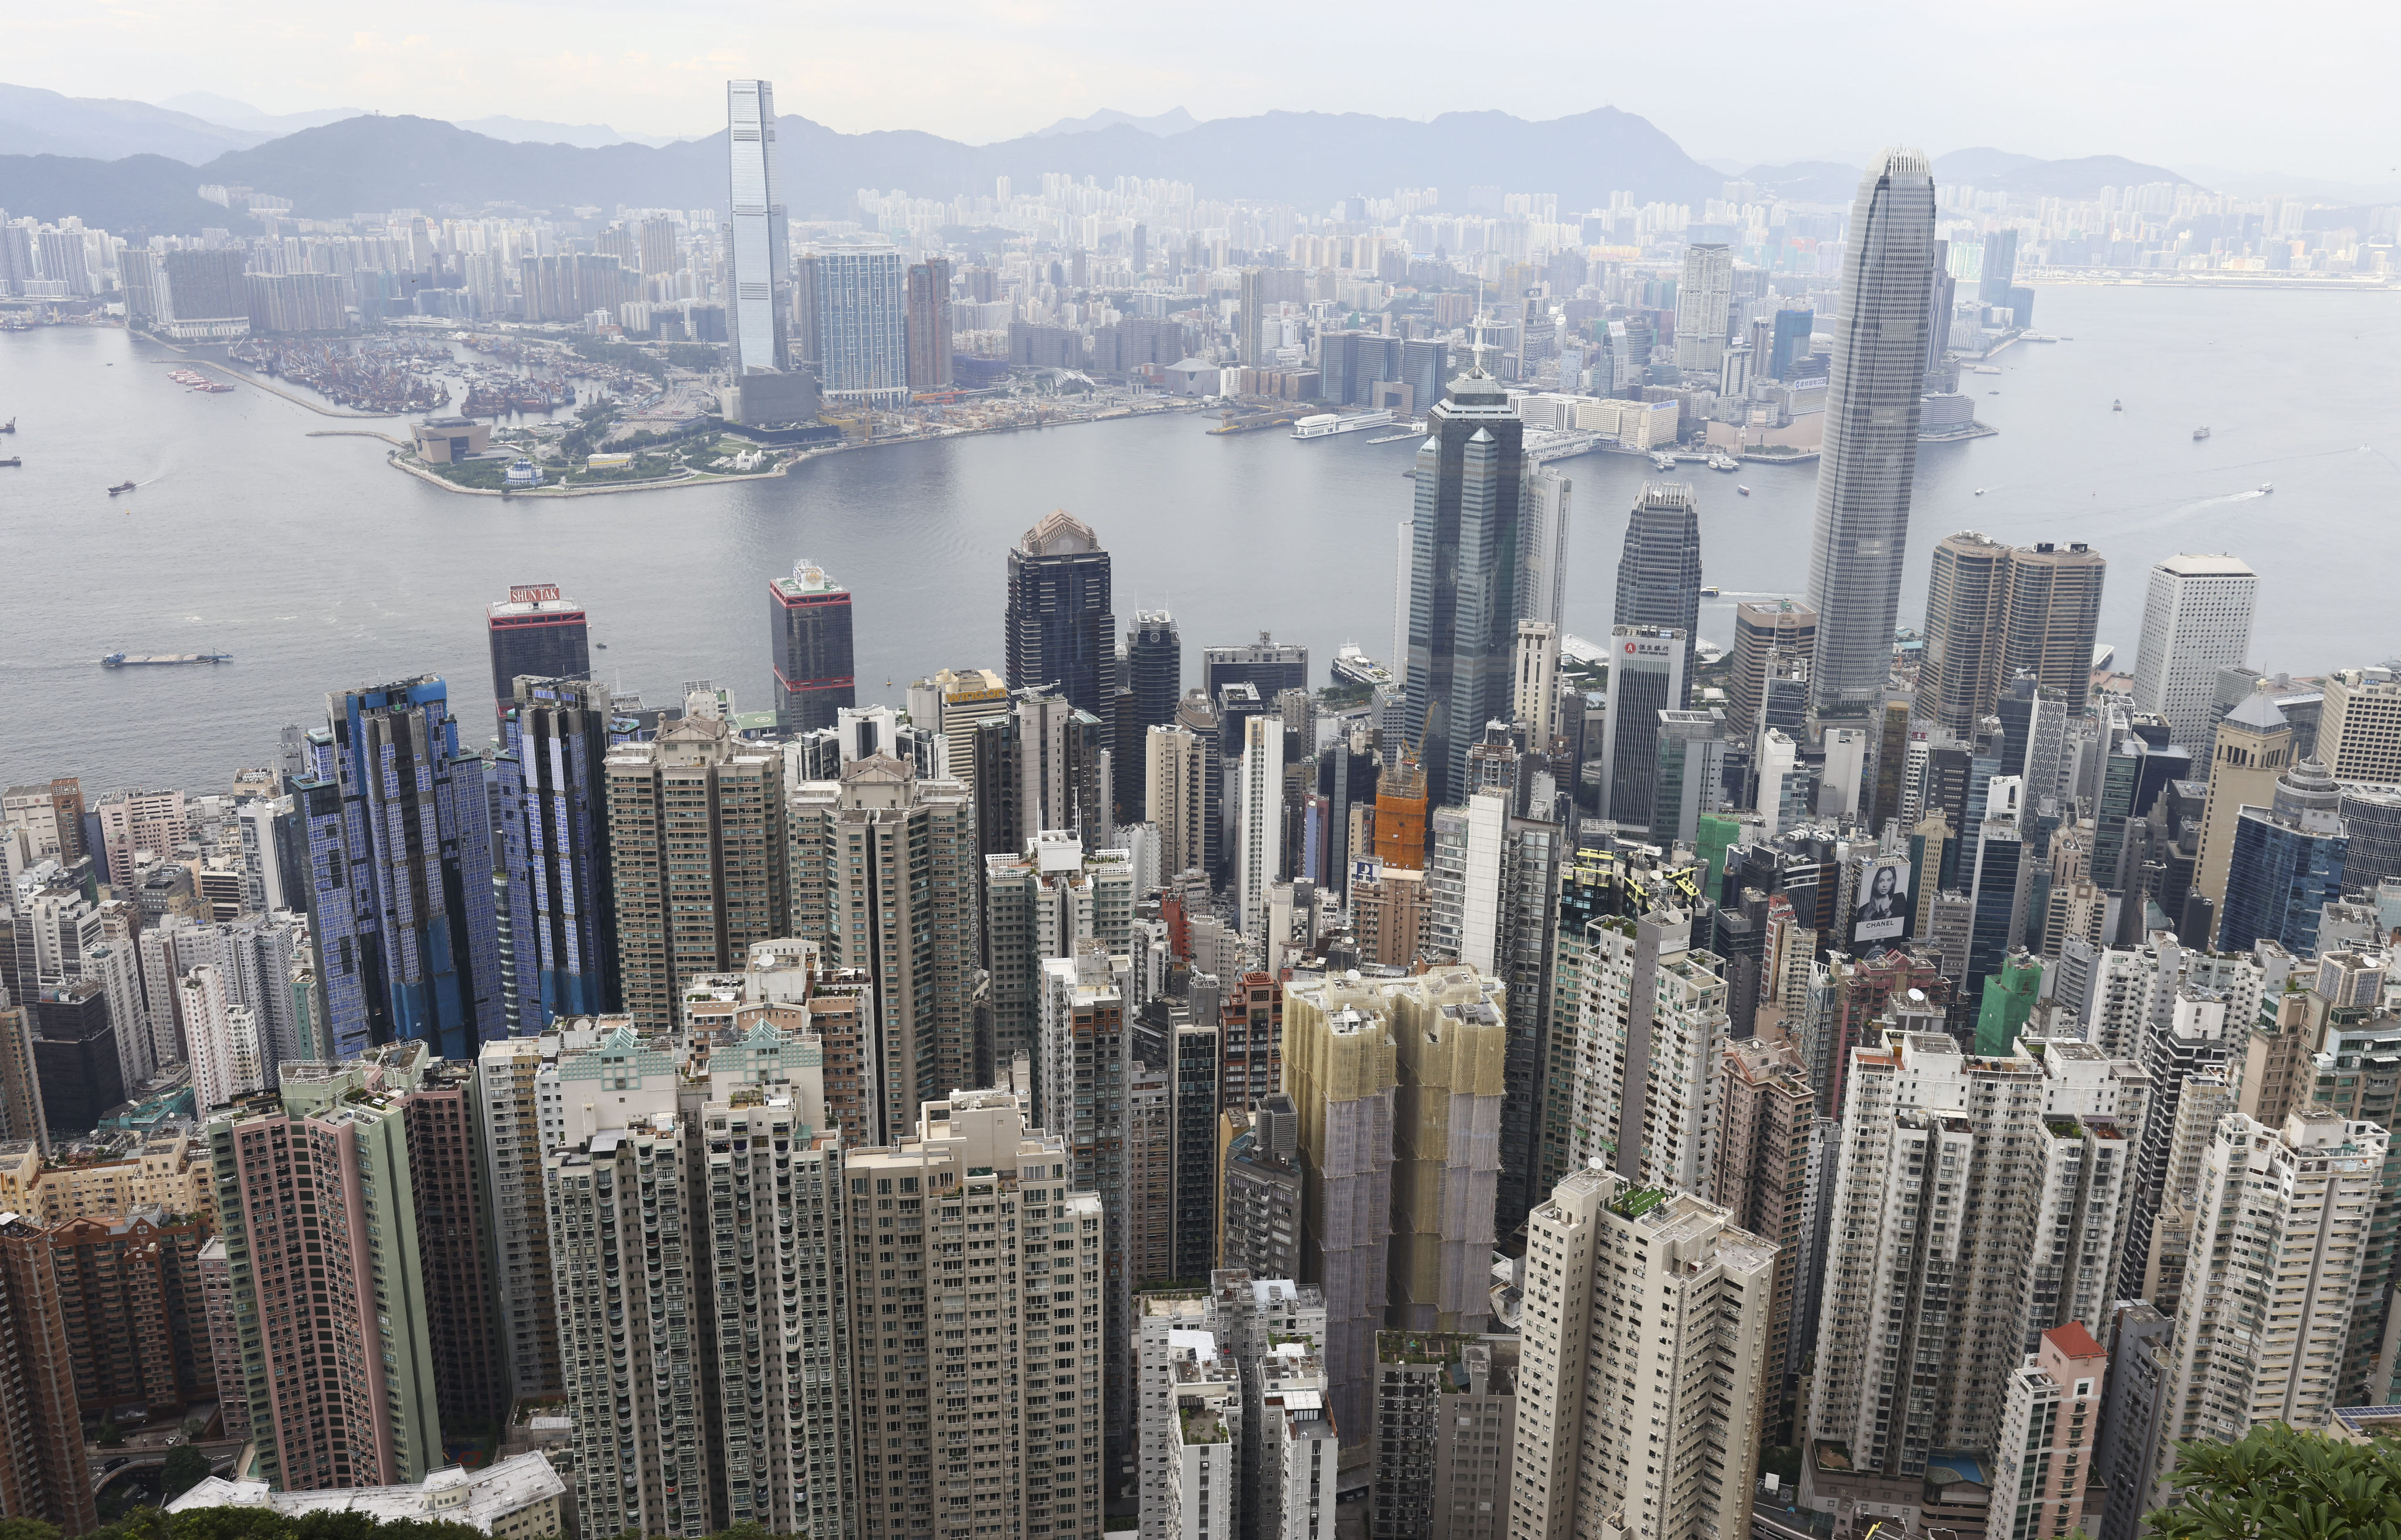 High interest rates and stuttering economy meant Hong Kong was not a favoured destination for international property investment. Photo: Dickson Lee